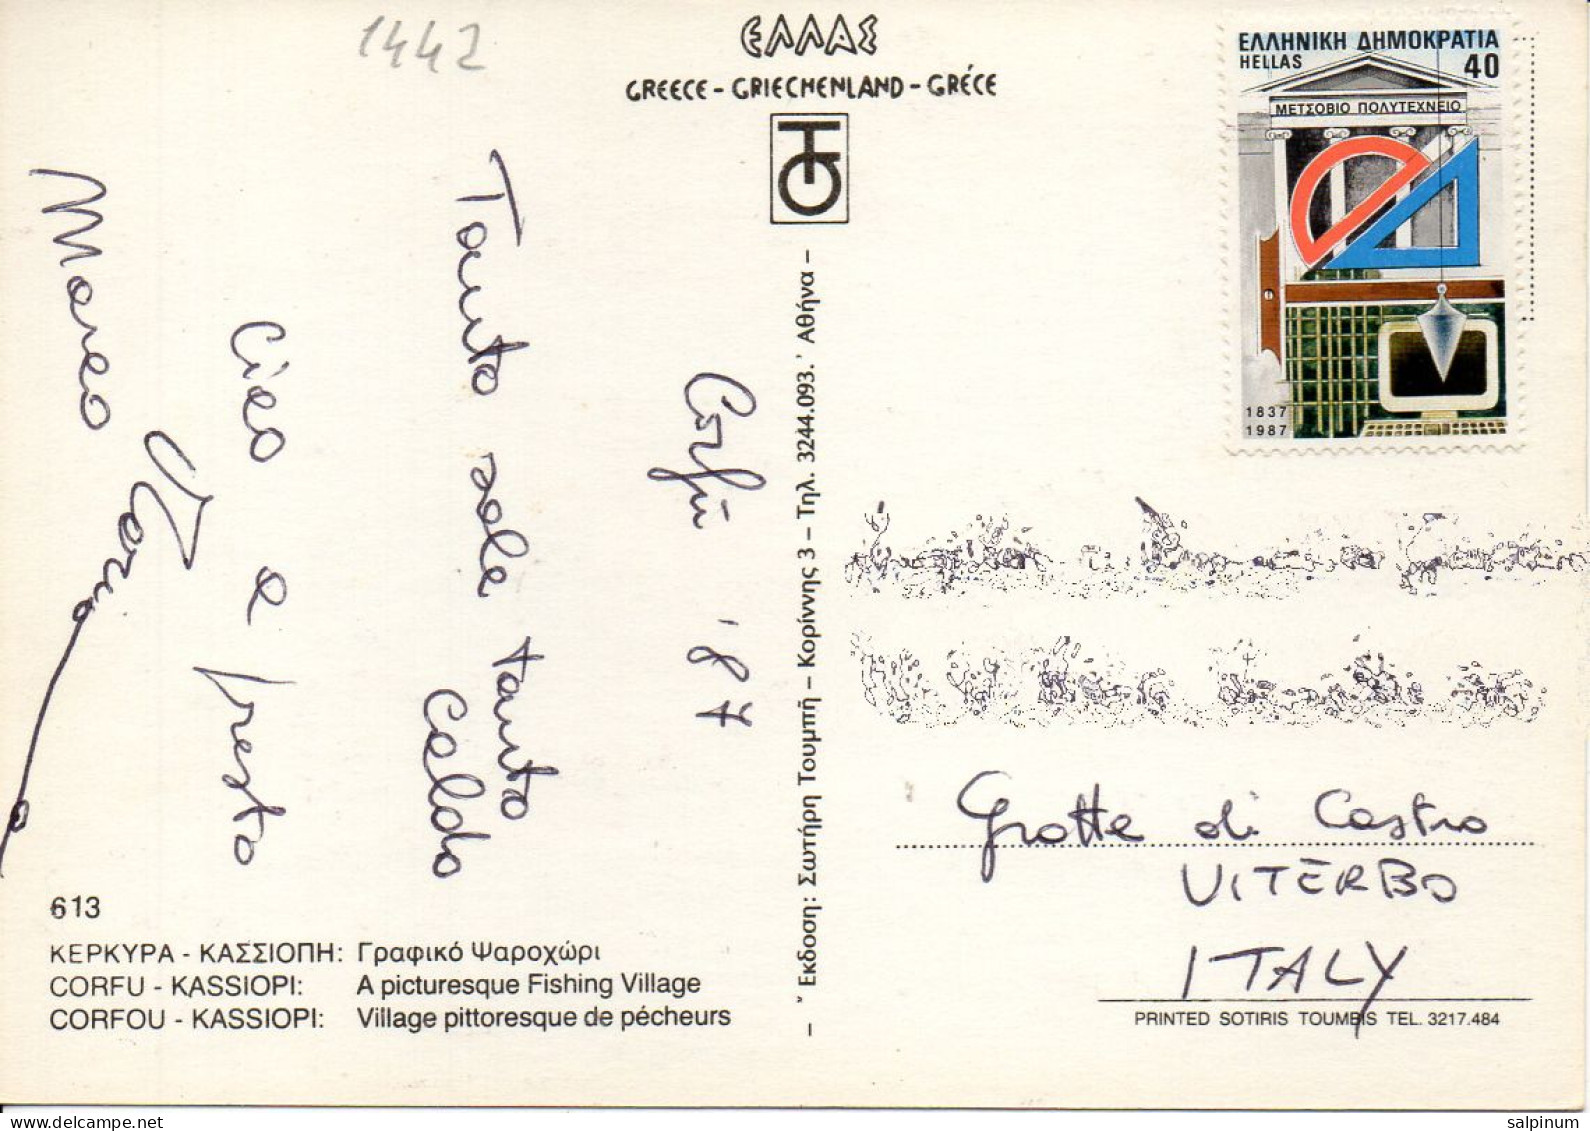 Philatelic Postcard With Stamps Sent From GREECE To ITALY - Briefe U. Dokumente